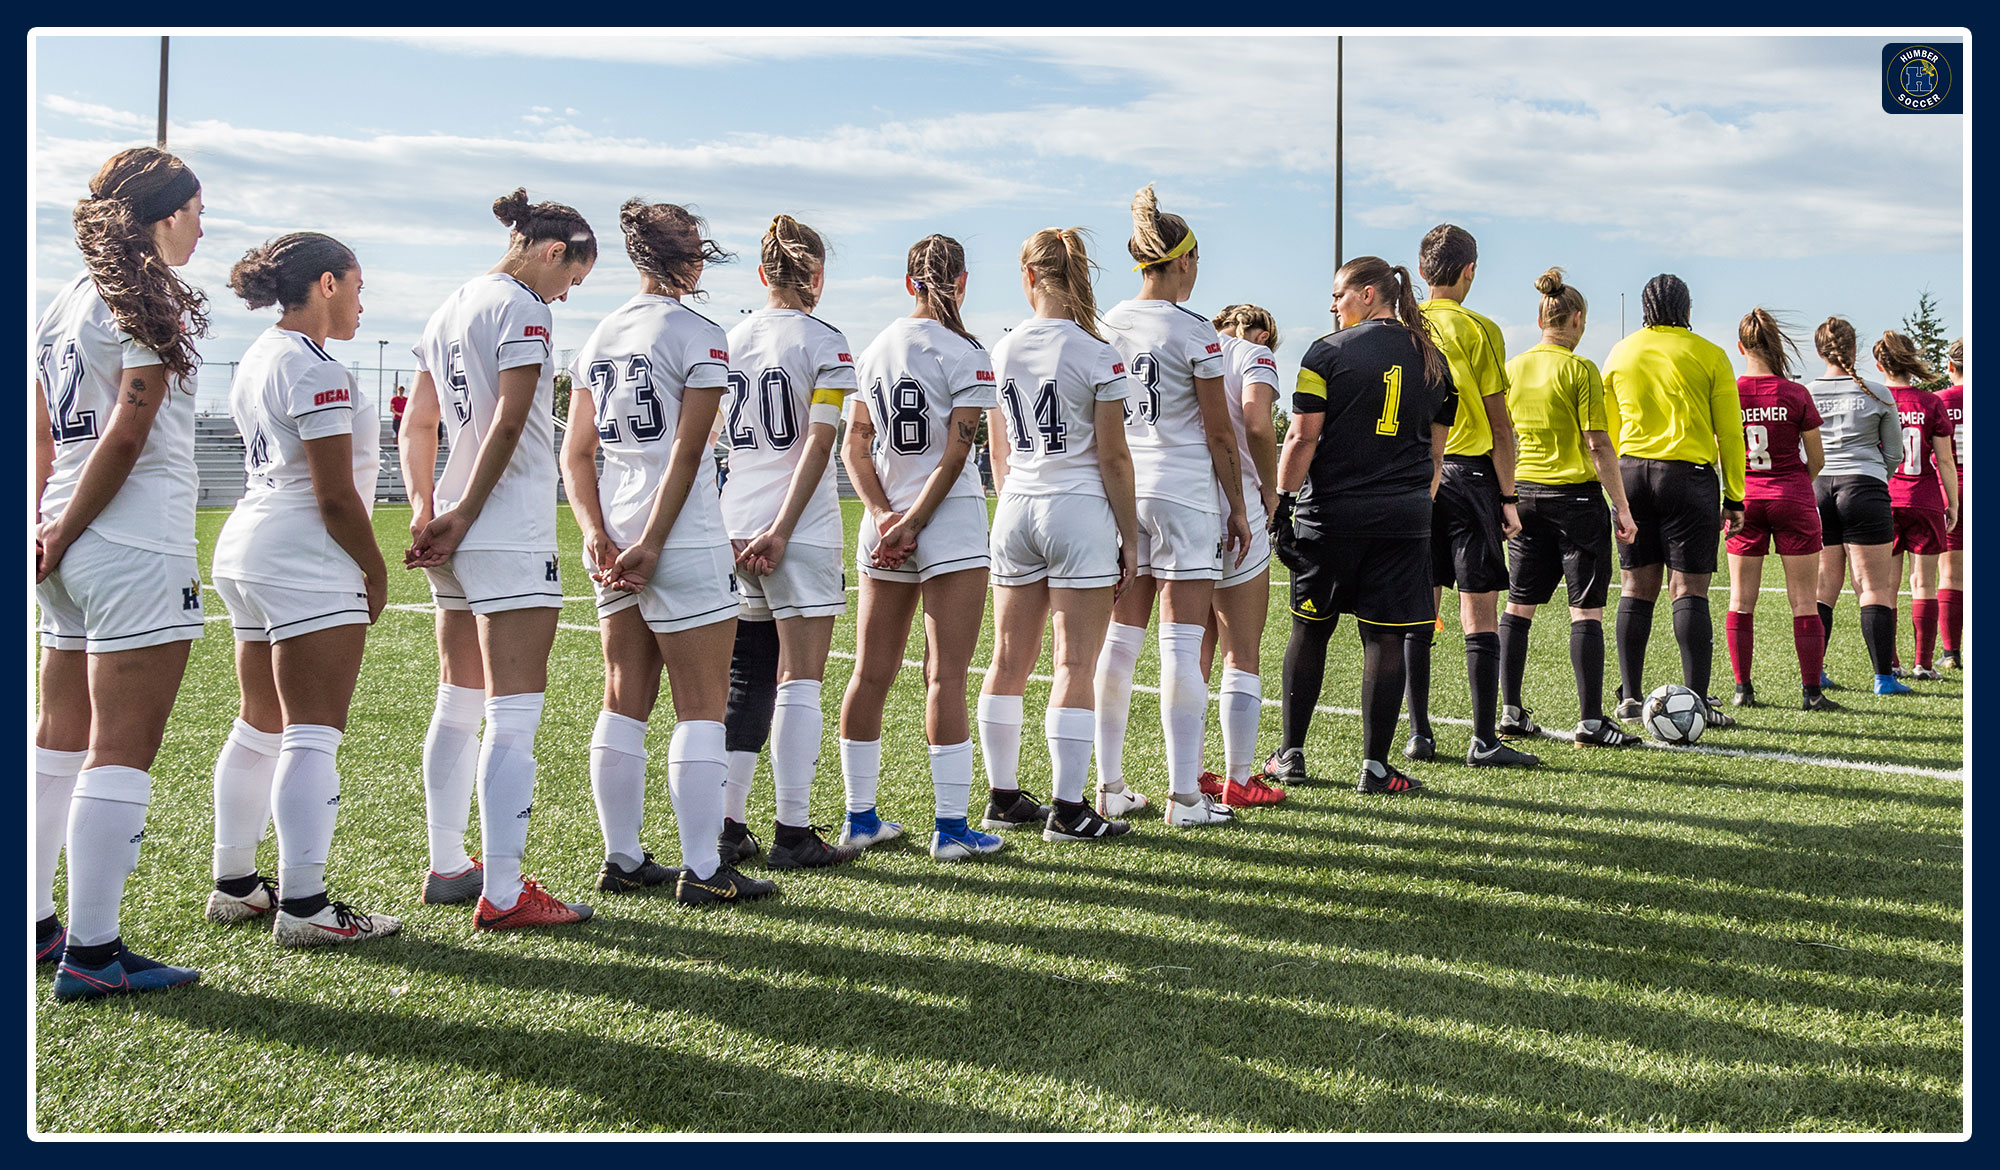 Women's soccer lineup for pre-game ceremonies